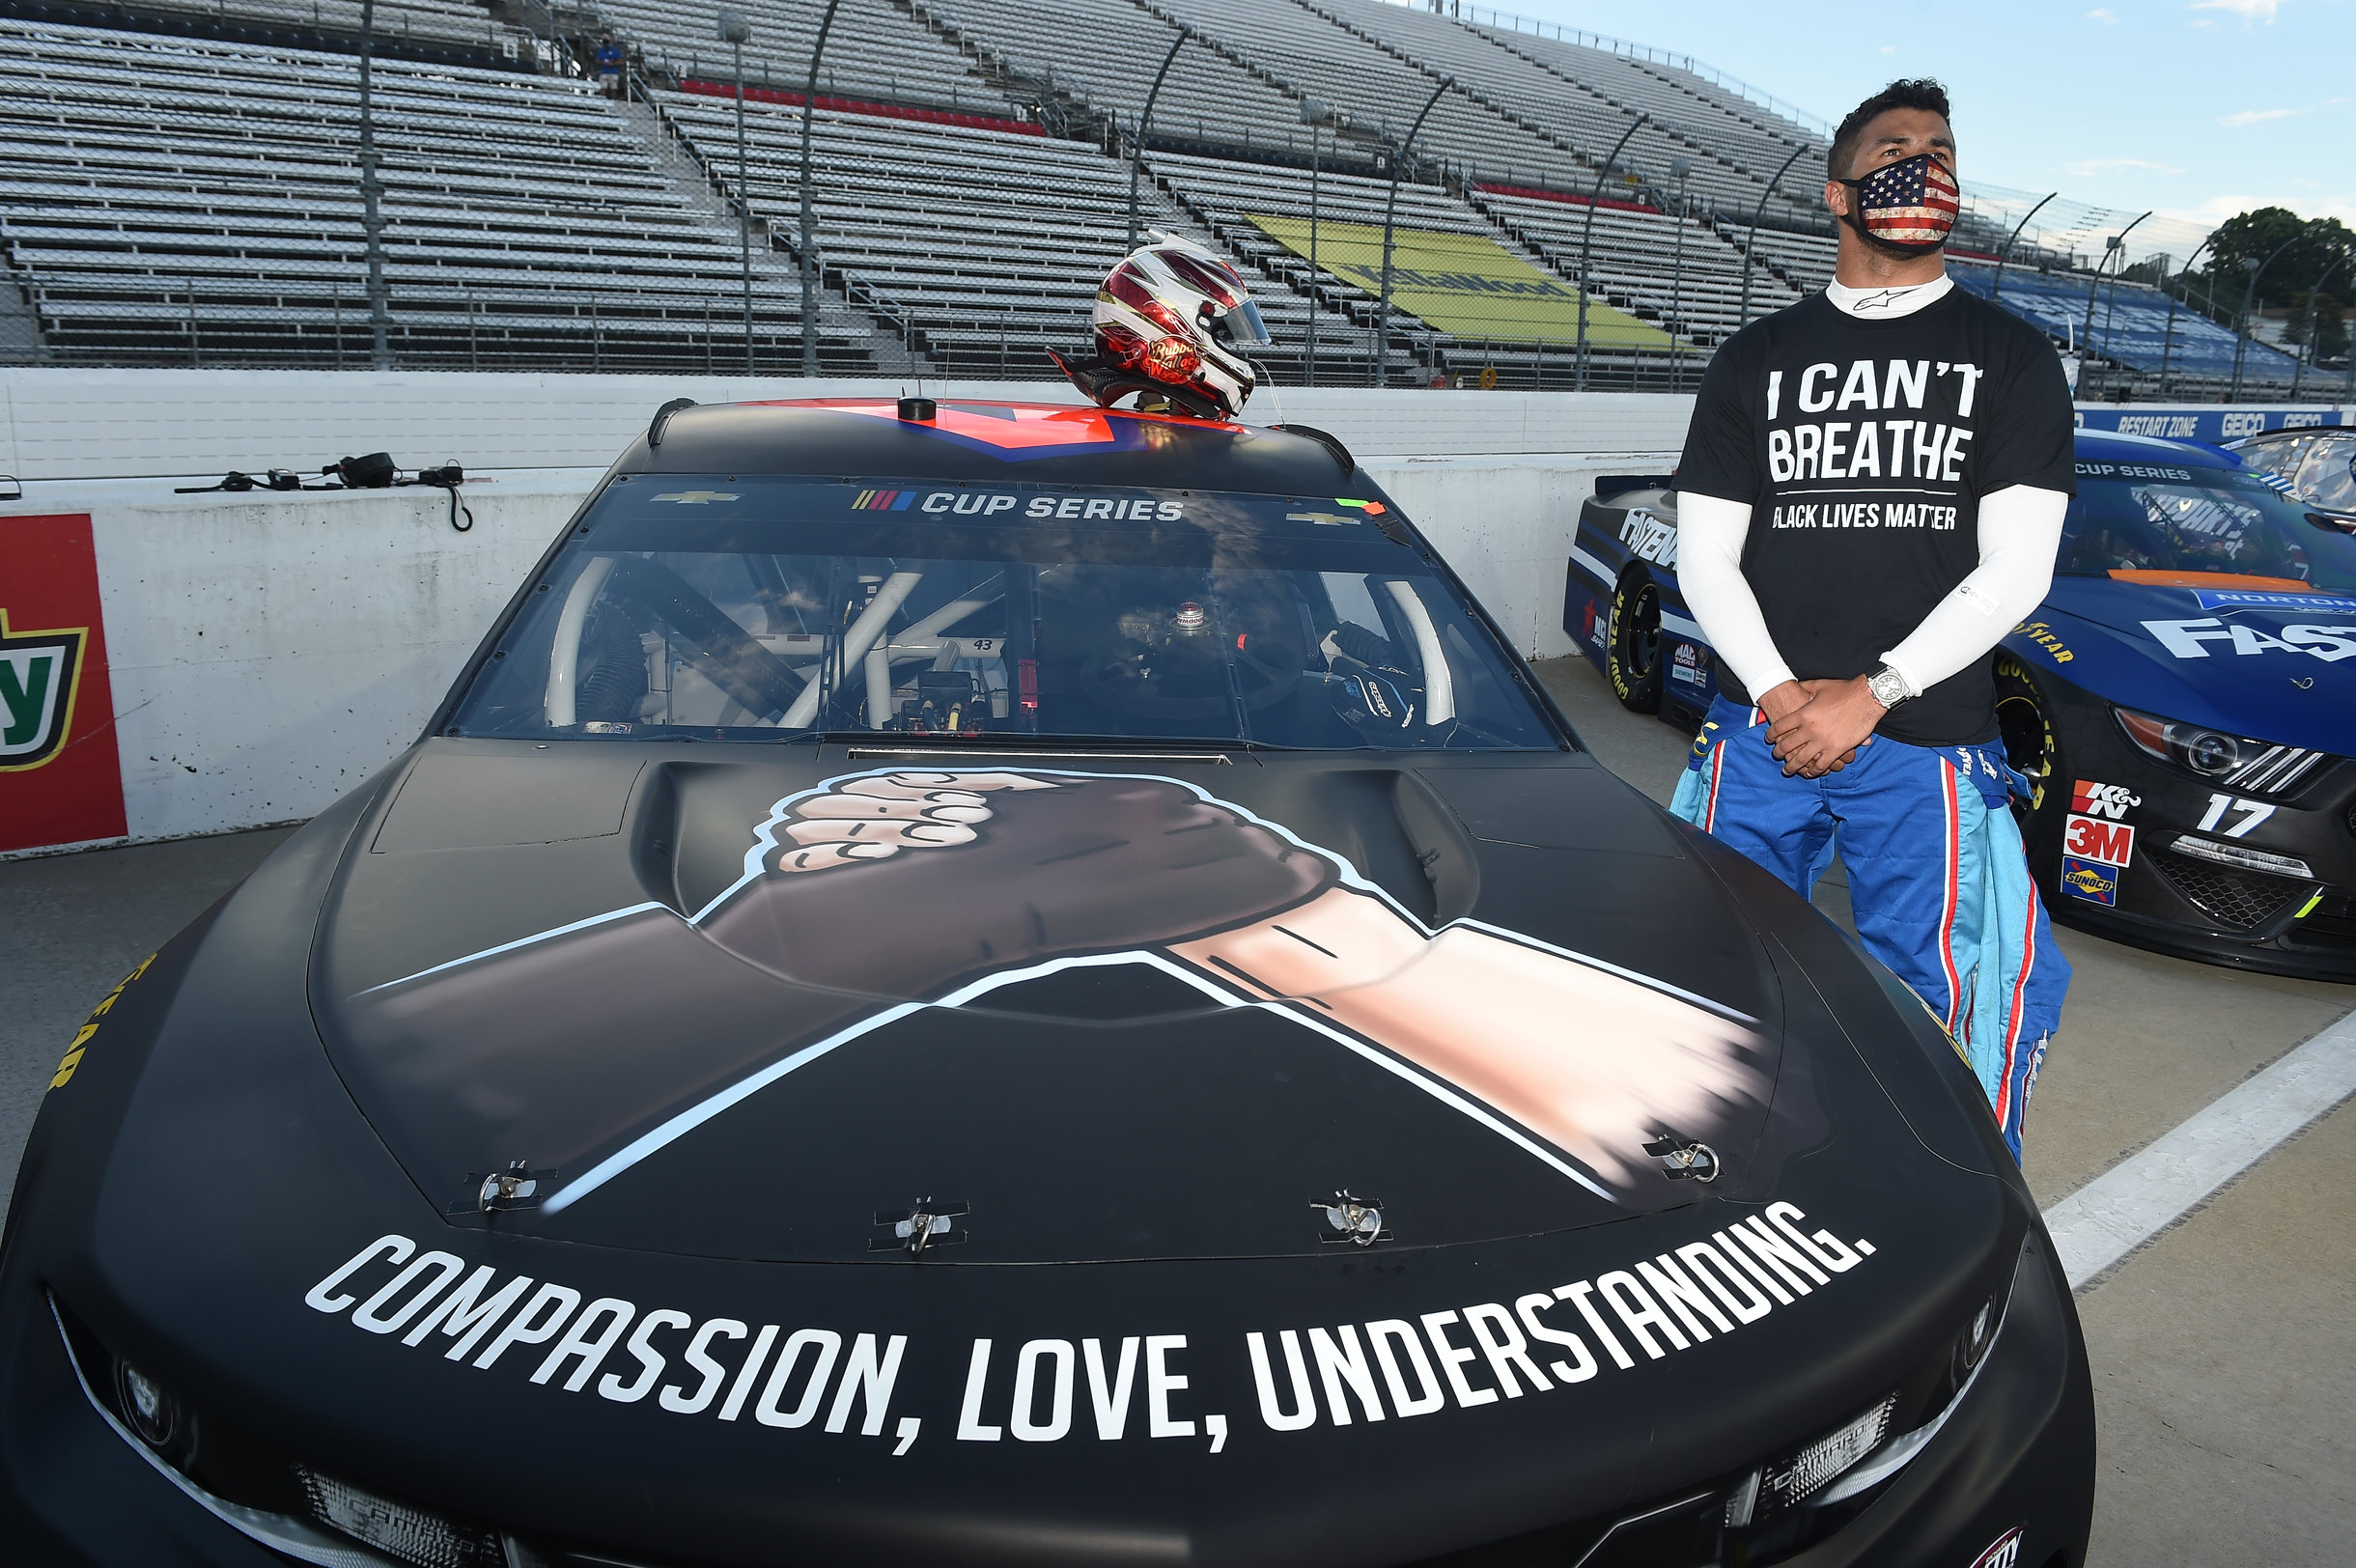 Bubba Wallace at Martinsville Speedway with the Black Lives Matter car - NASCAR Cup Series